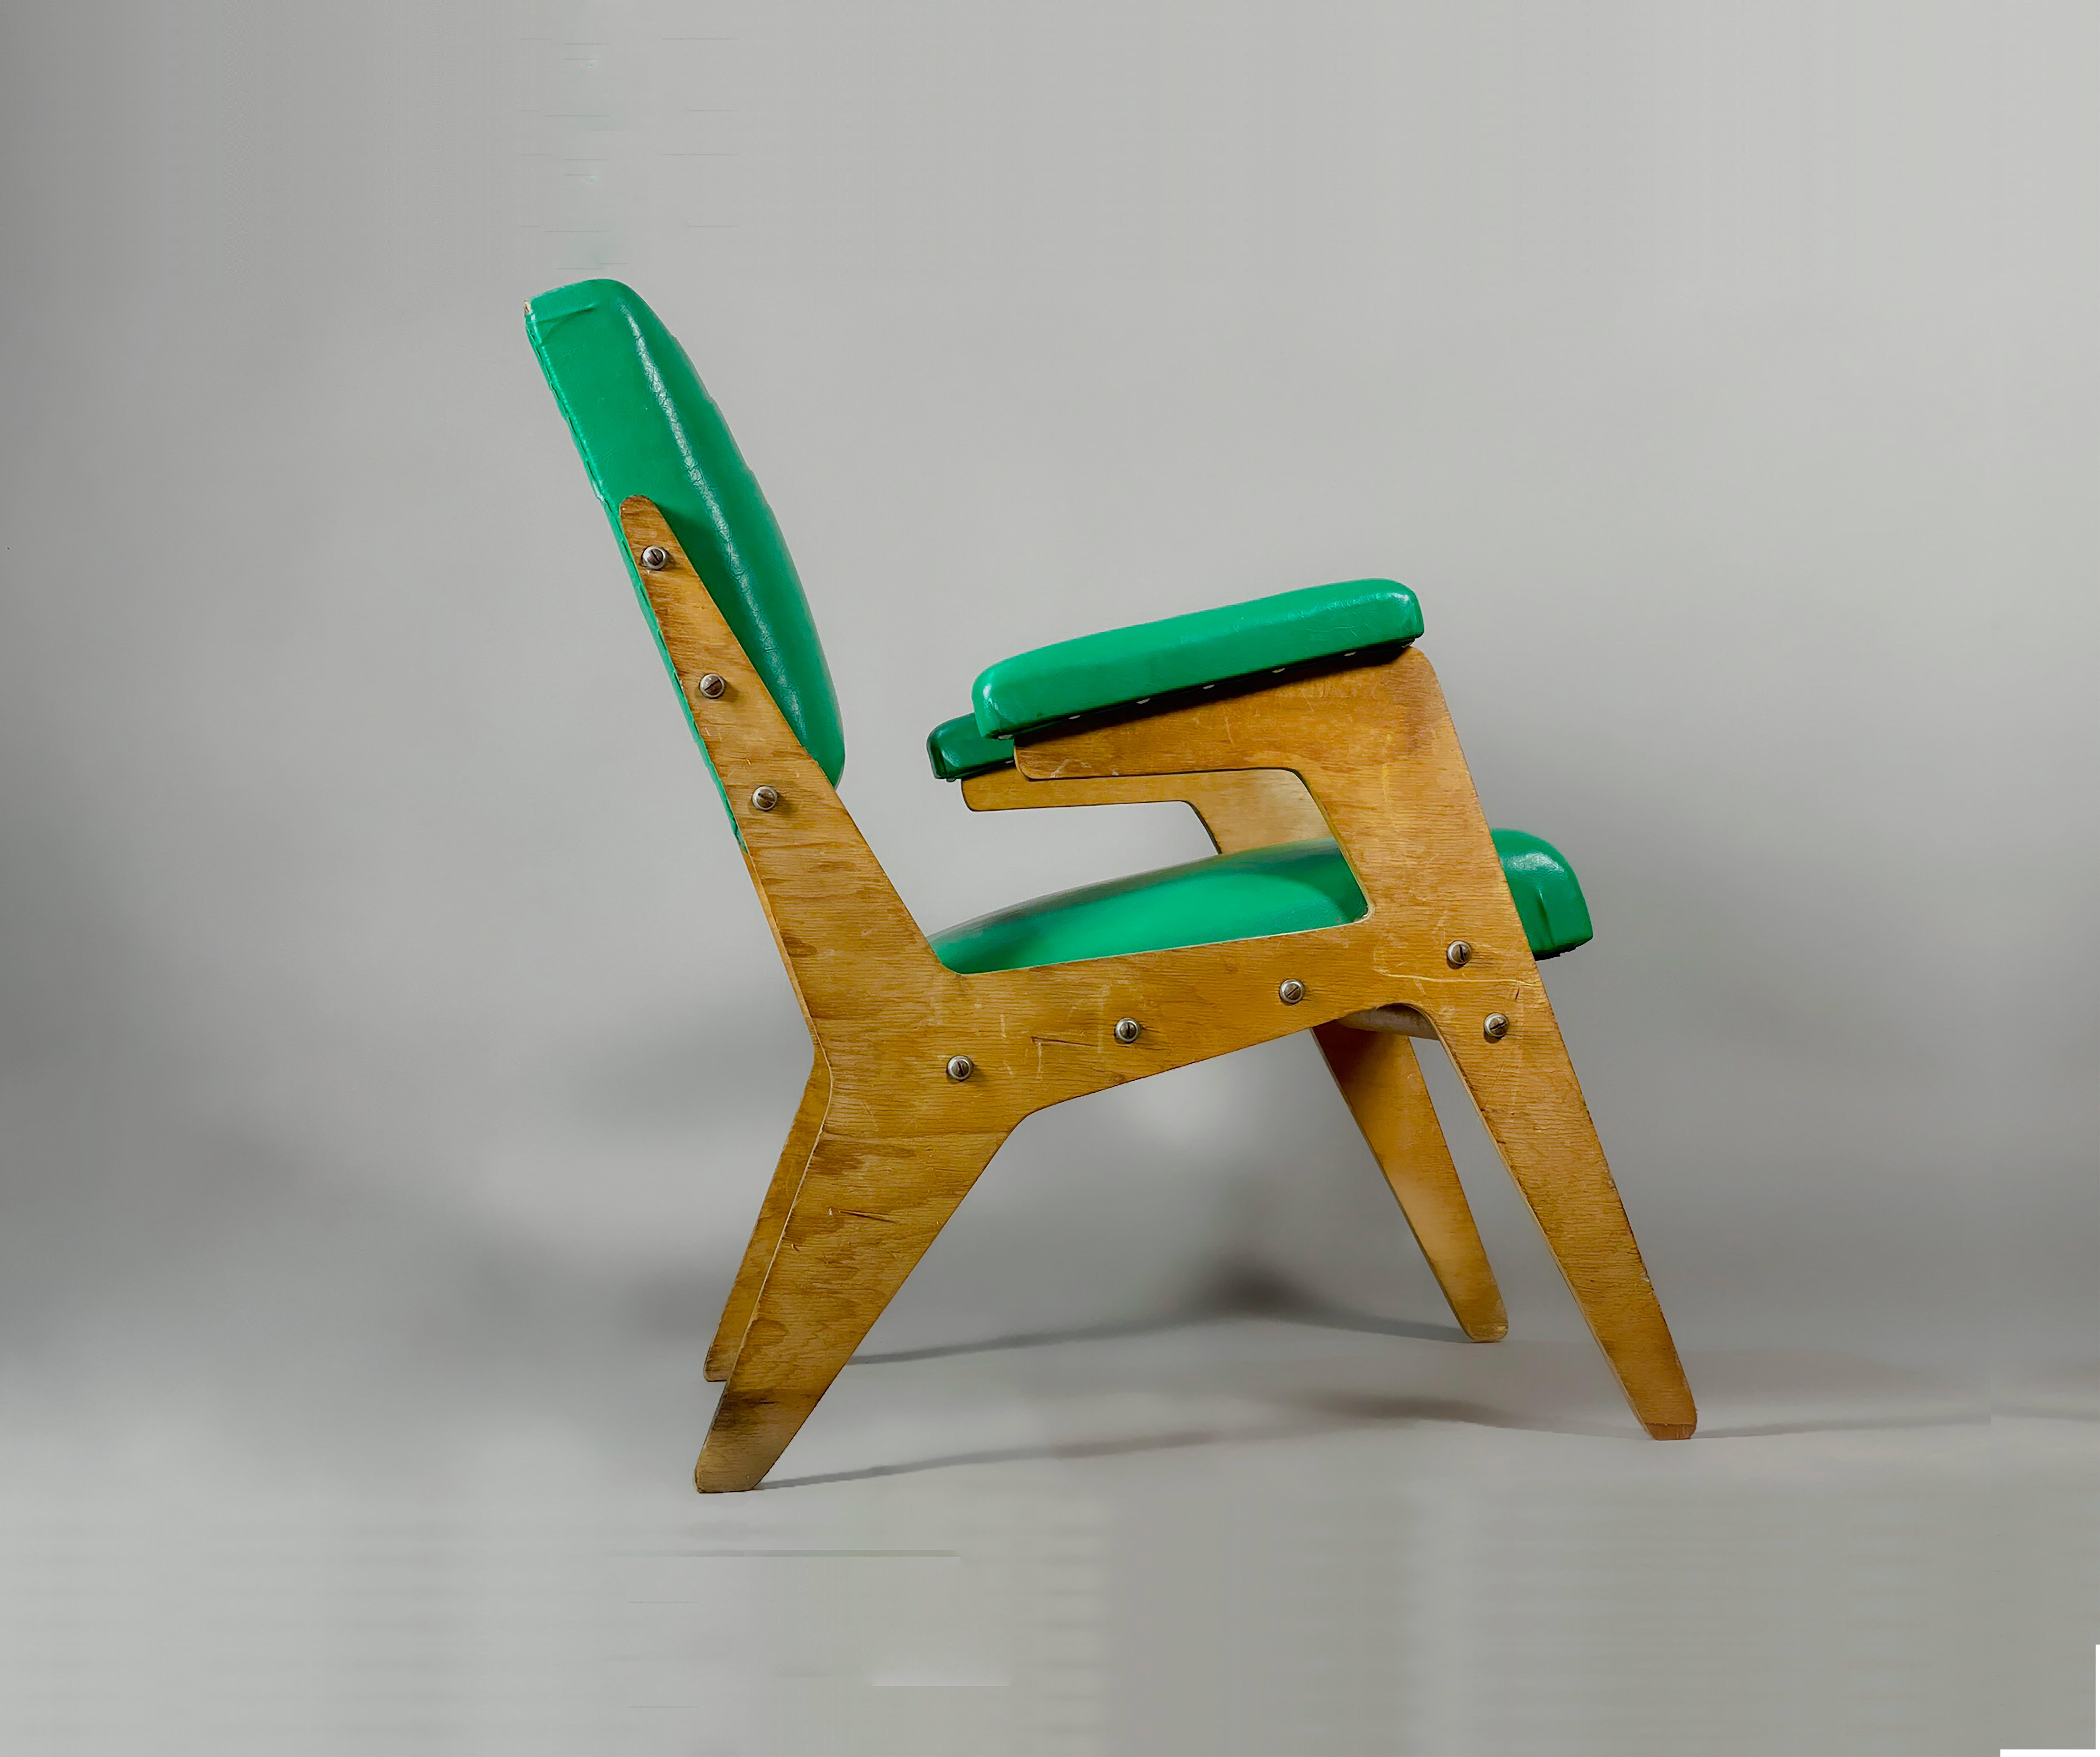 Brazilian Zanine Caldas, Green Chair, C. 1950, Plywood and Green Synthetic Leather